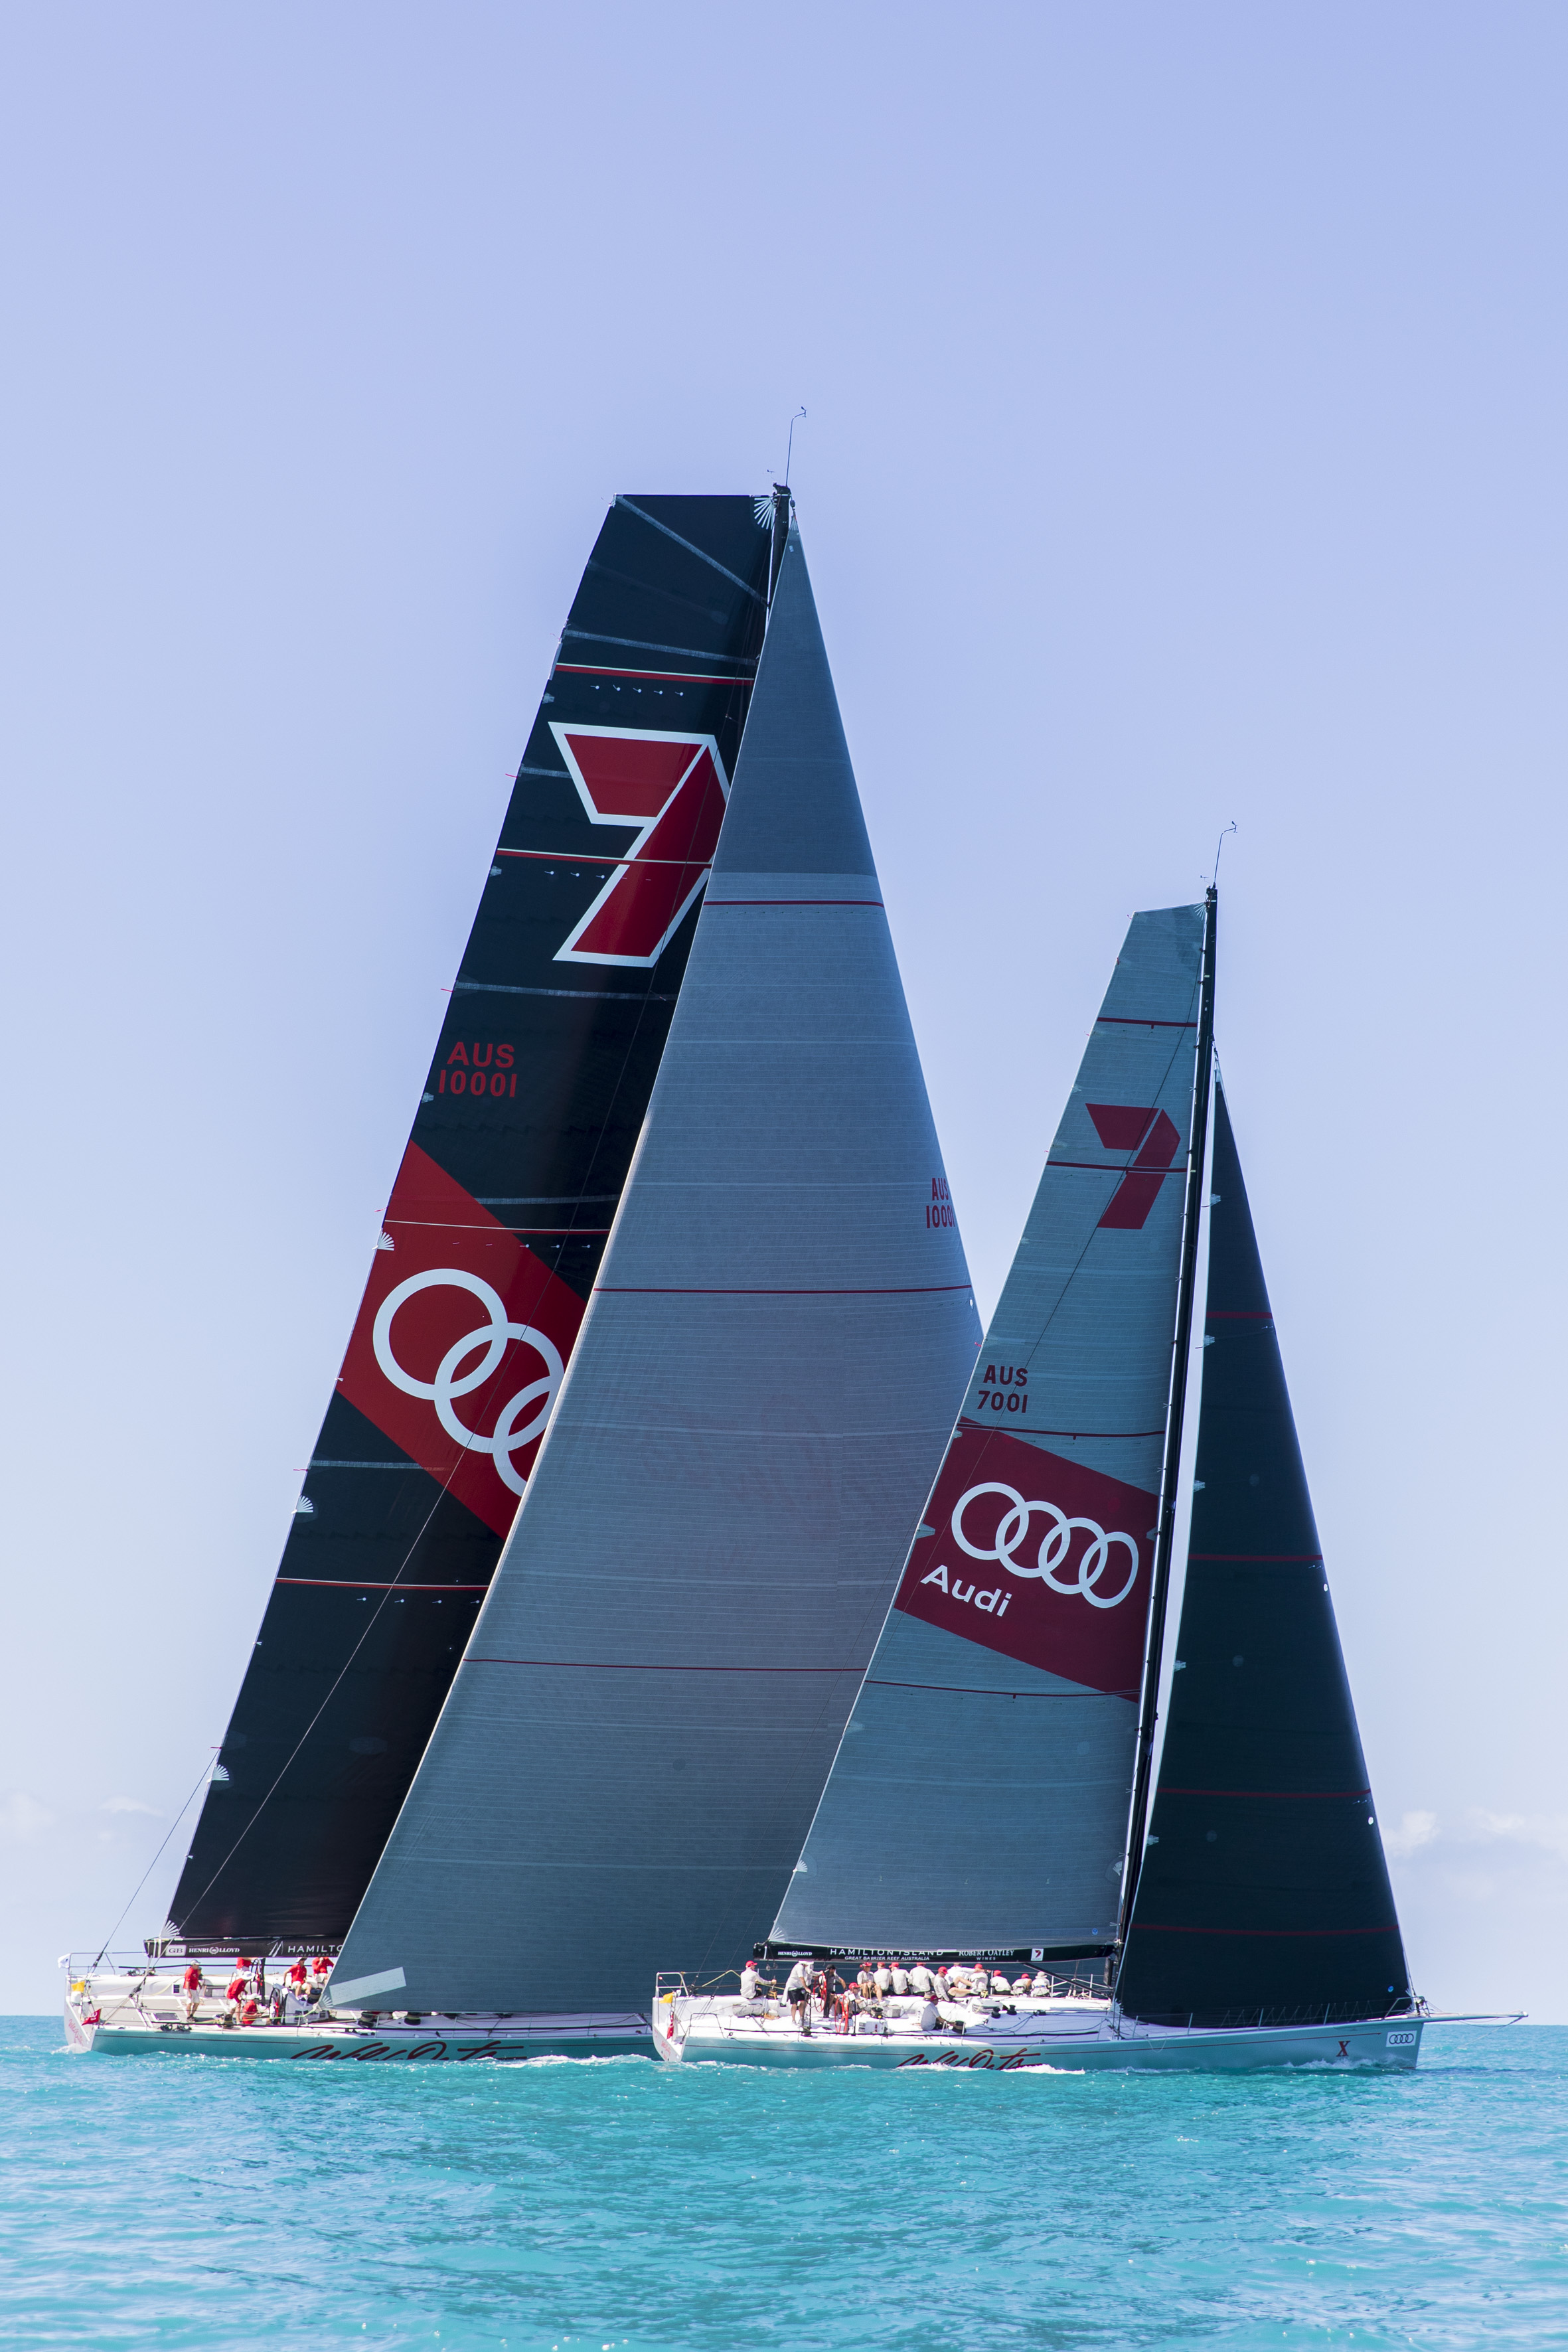 Wild Oats XI and supermaxi rivals set for a record run in the Rolex Sydney to Hobart yacht race